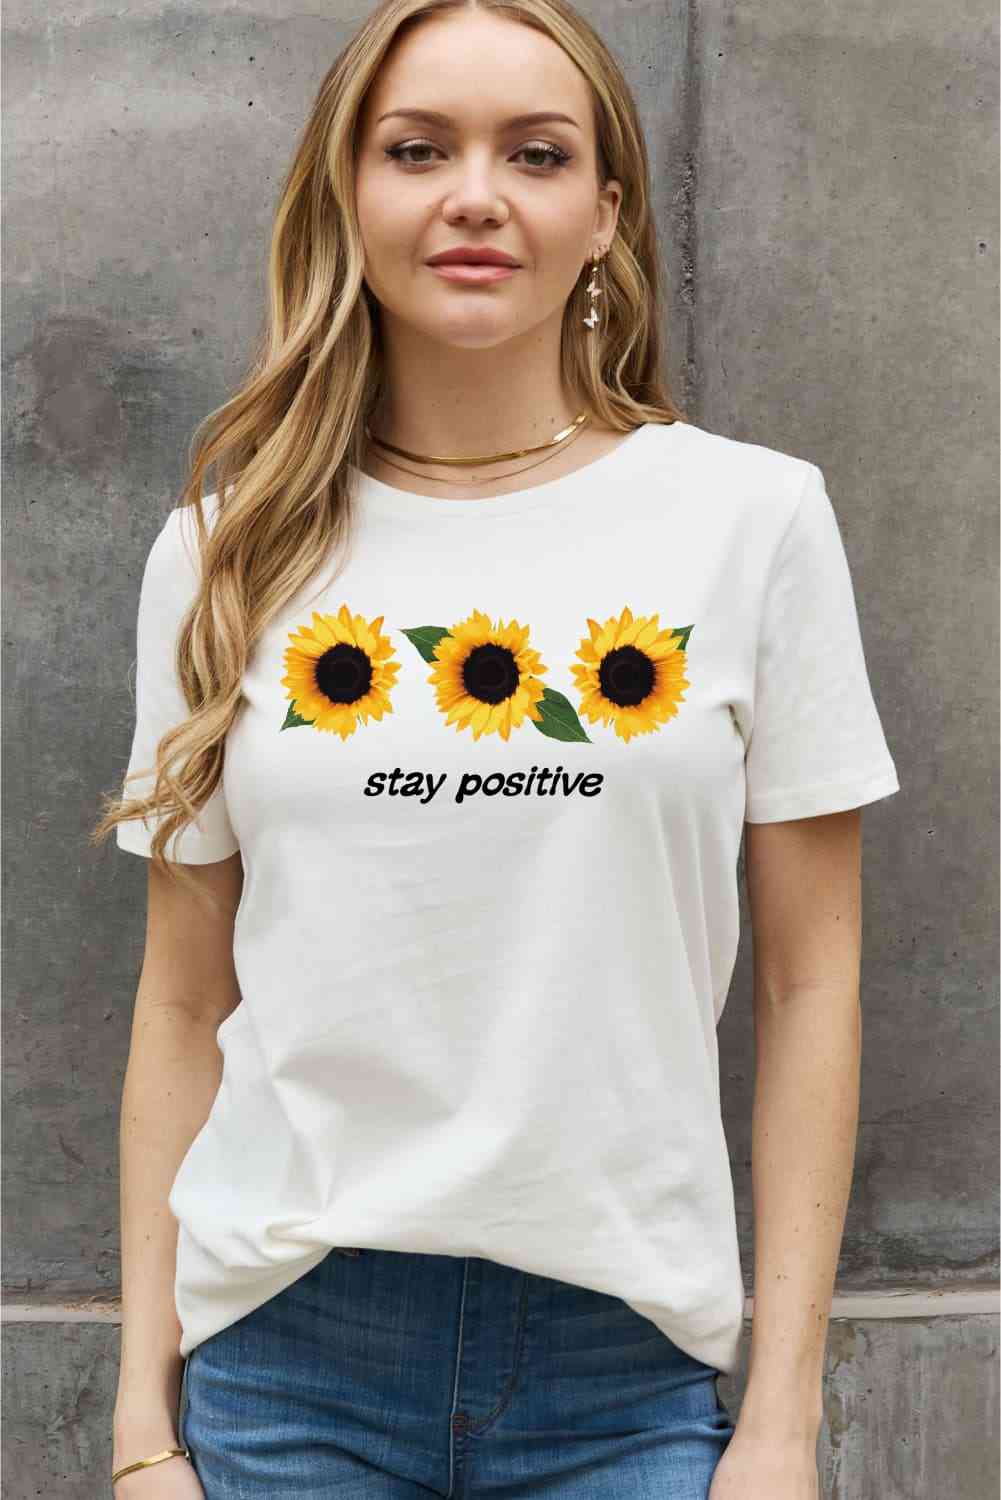 Simply Love Full Size STAY POSITIVE Sunflower Graphic Cotton Tee